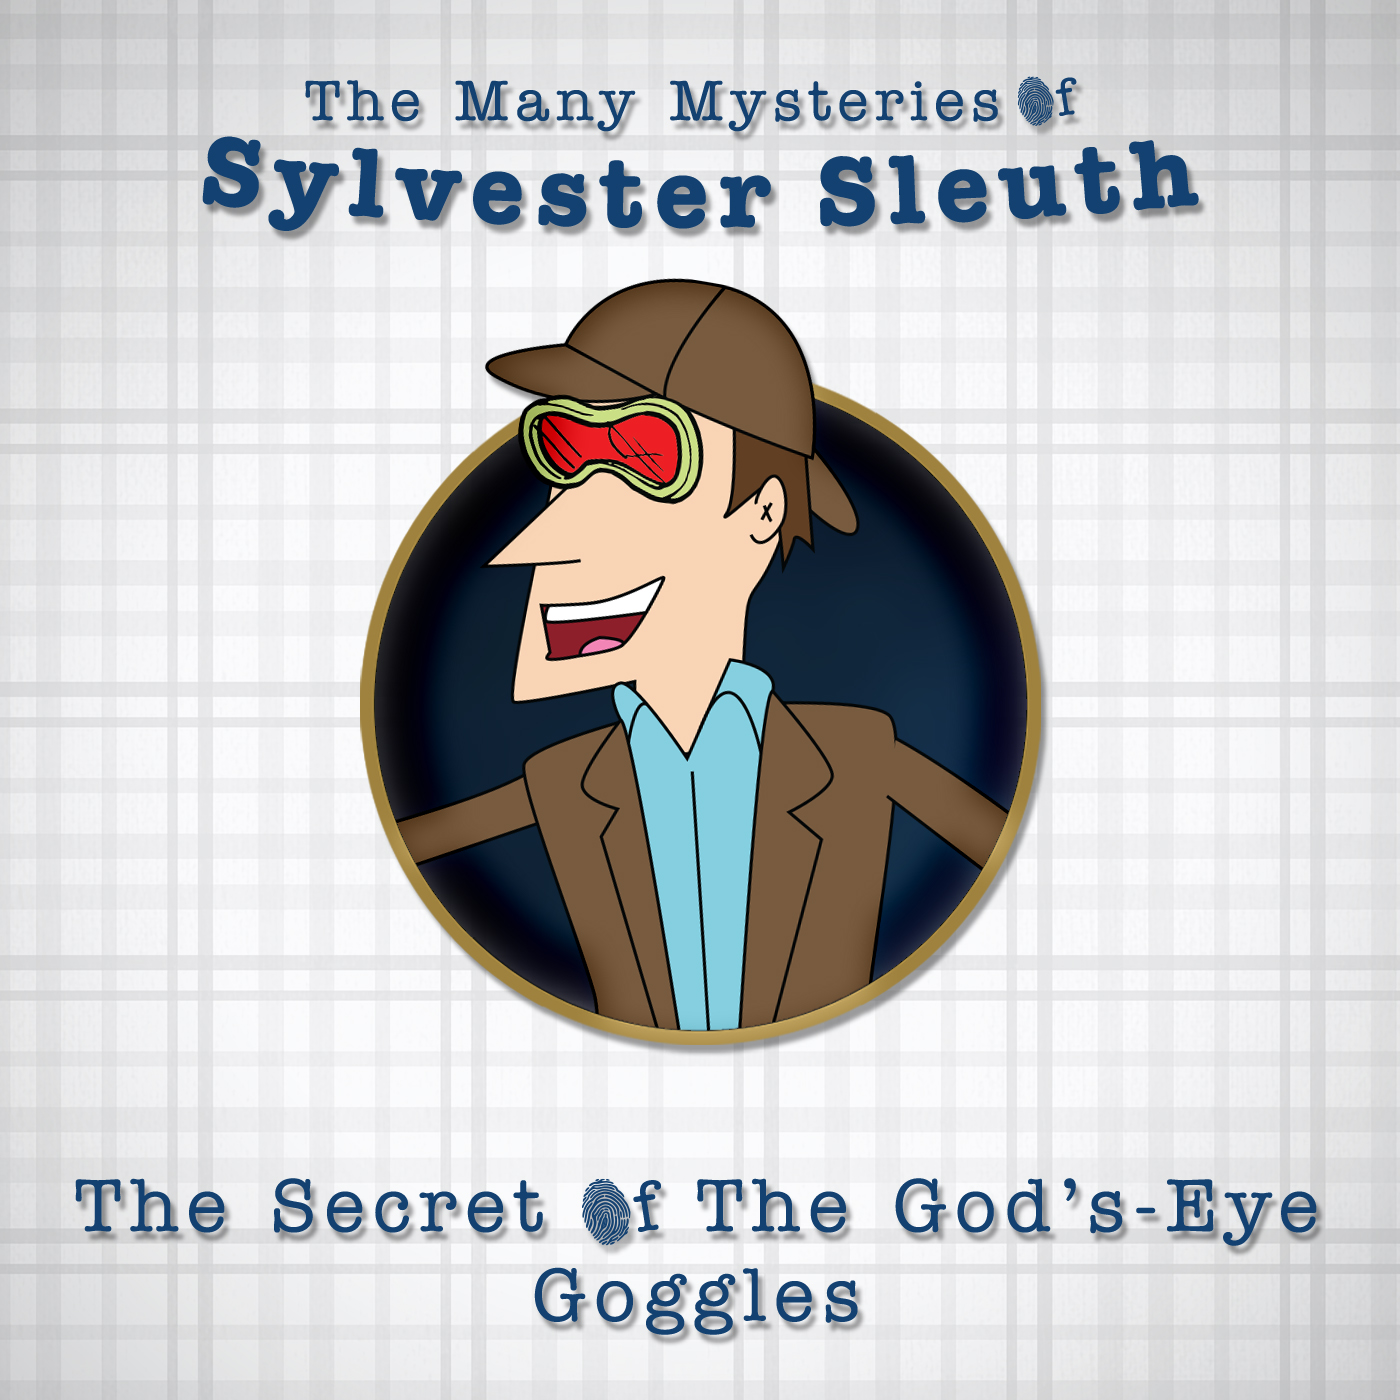 Sylvester Sleuth and the Secret of the God's-Eye Goggles